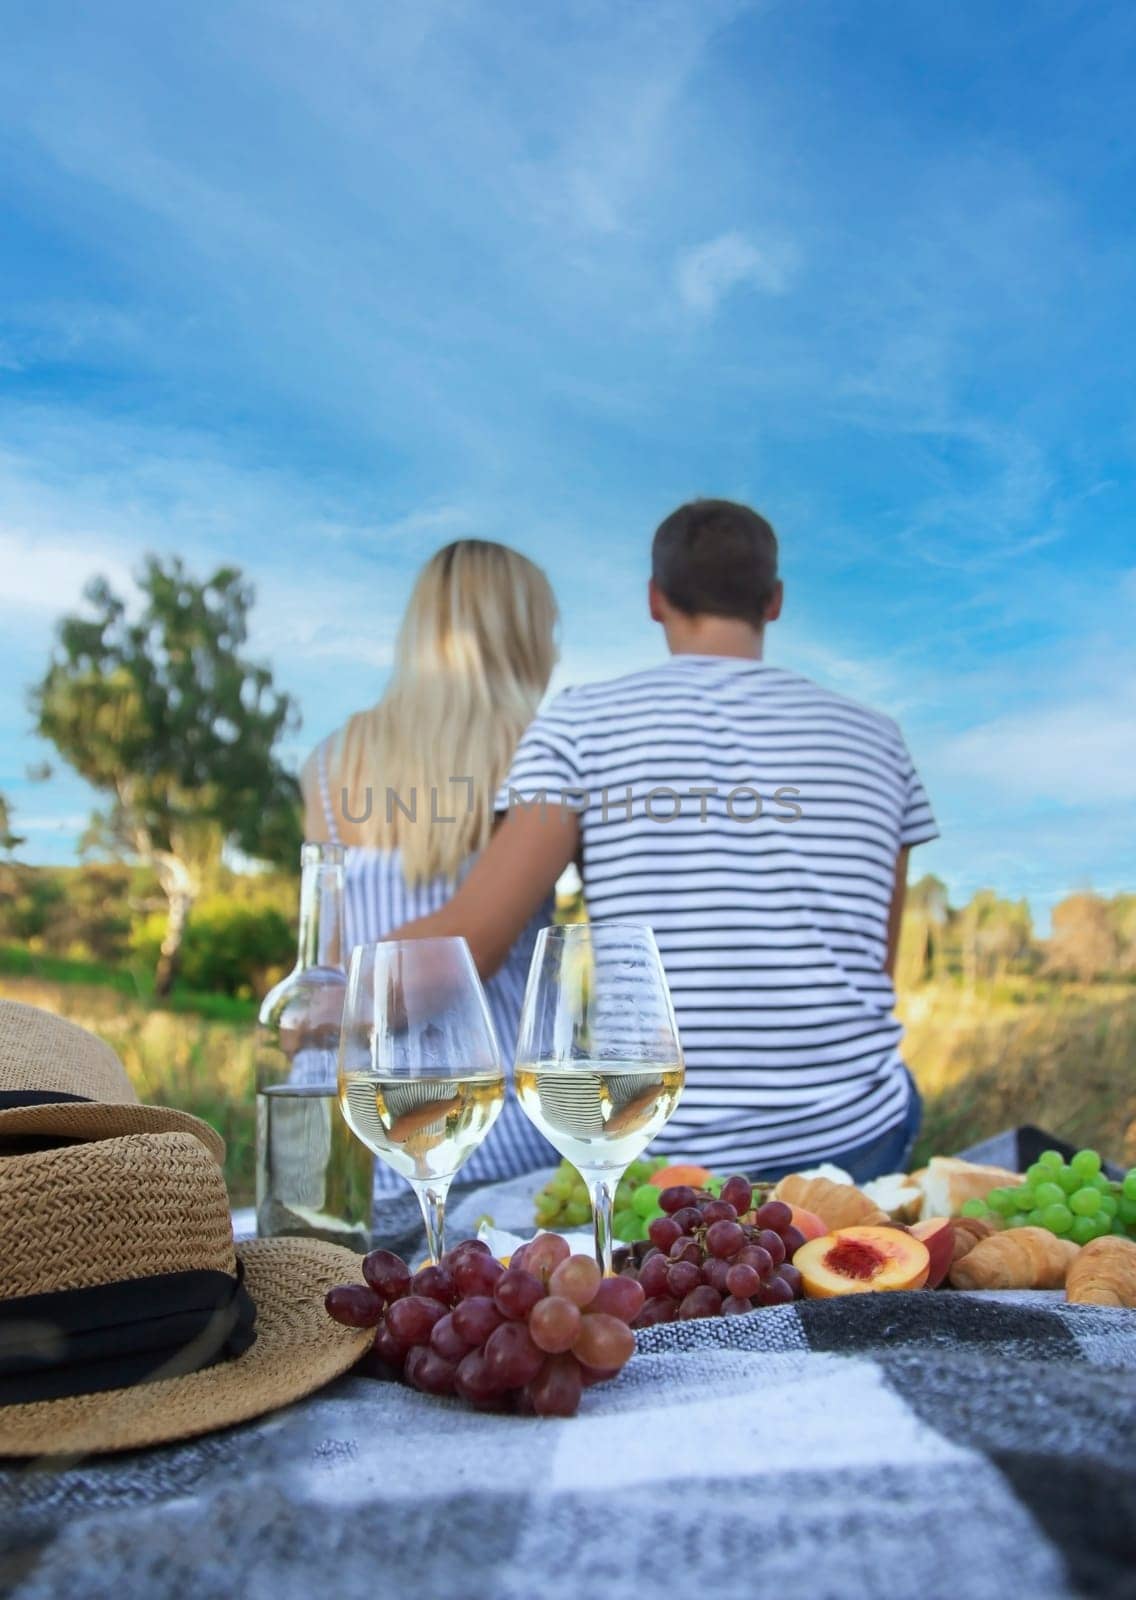 couple in love drinking wine on a picnic. Nature. Selective focus